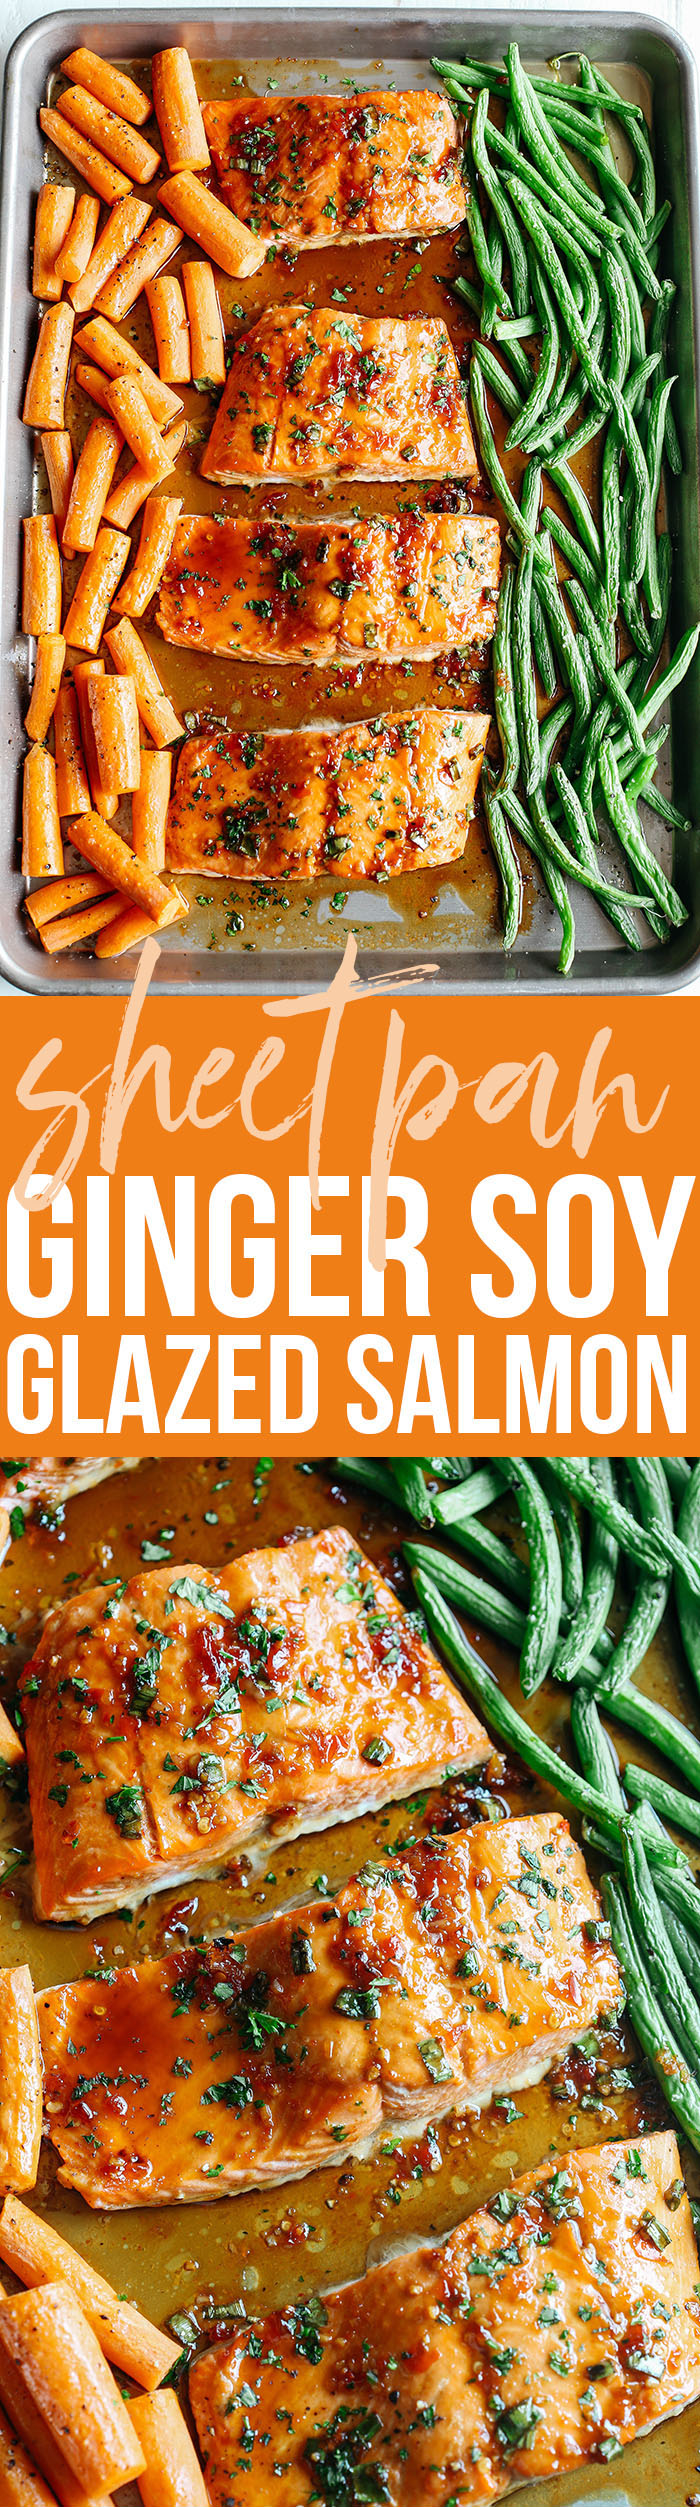 This Sheet Pan Ginger Soy Glazed Salmon makes the perfect weeknight dinner that’s quick, healthy and easily made all on one pan!